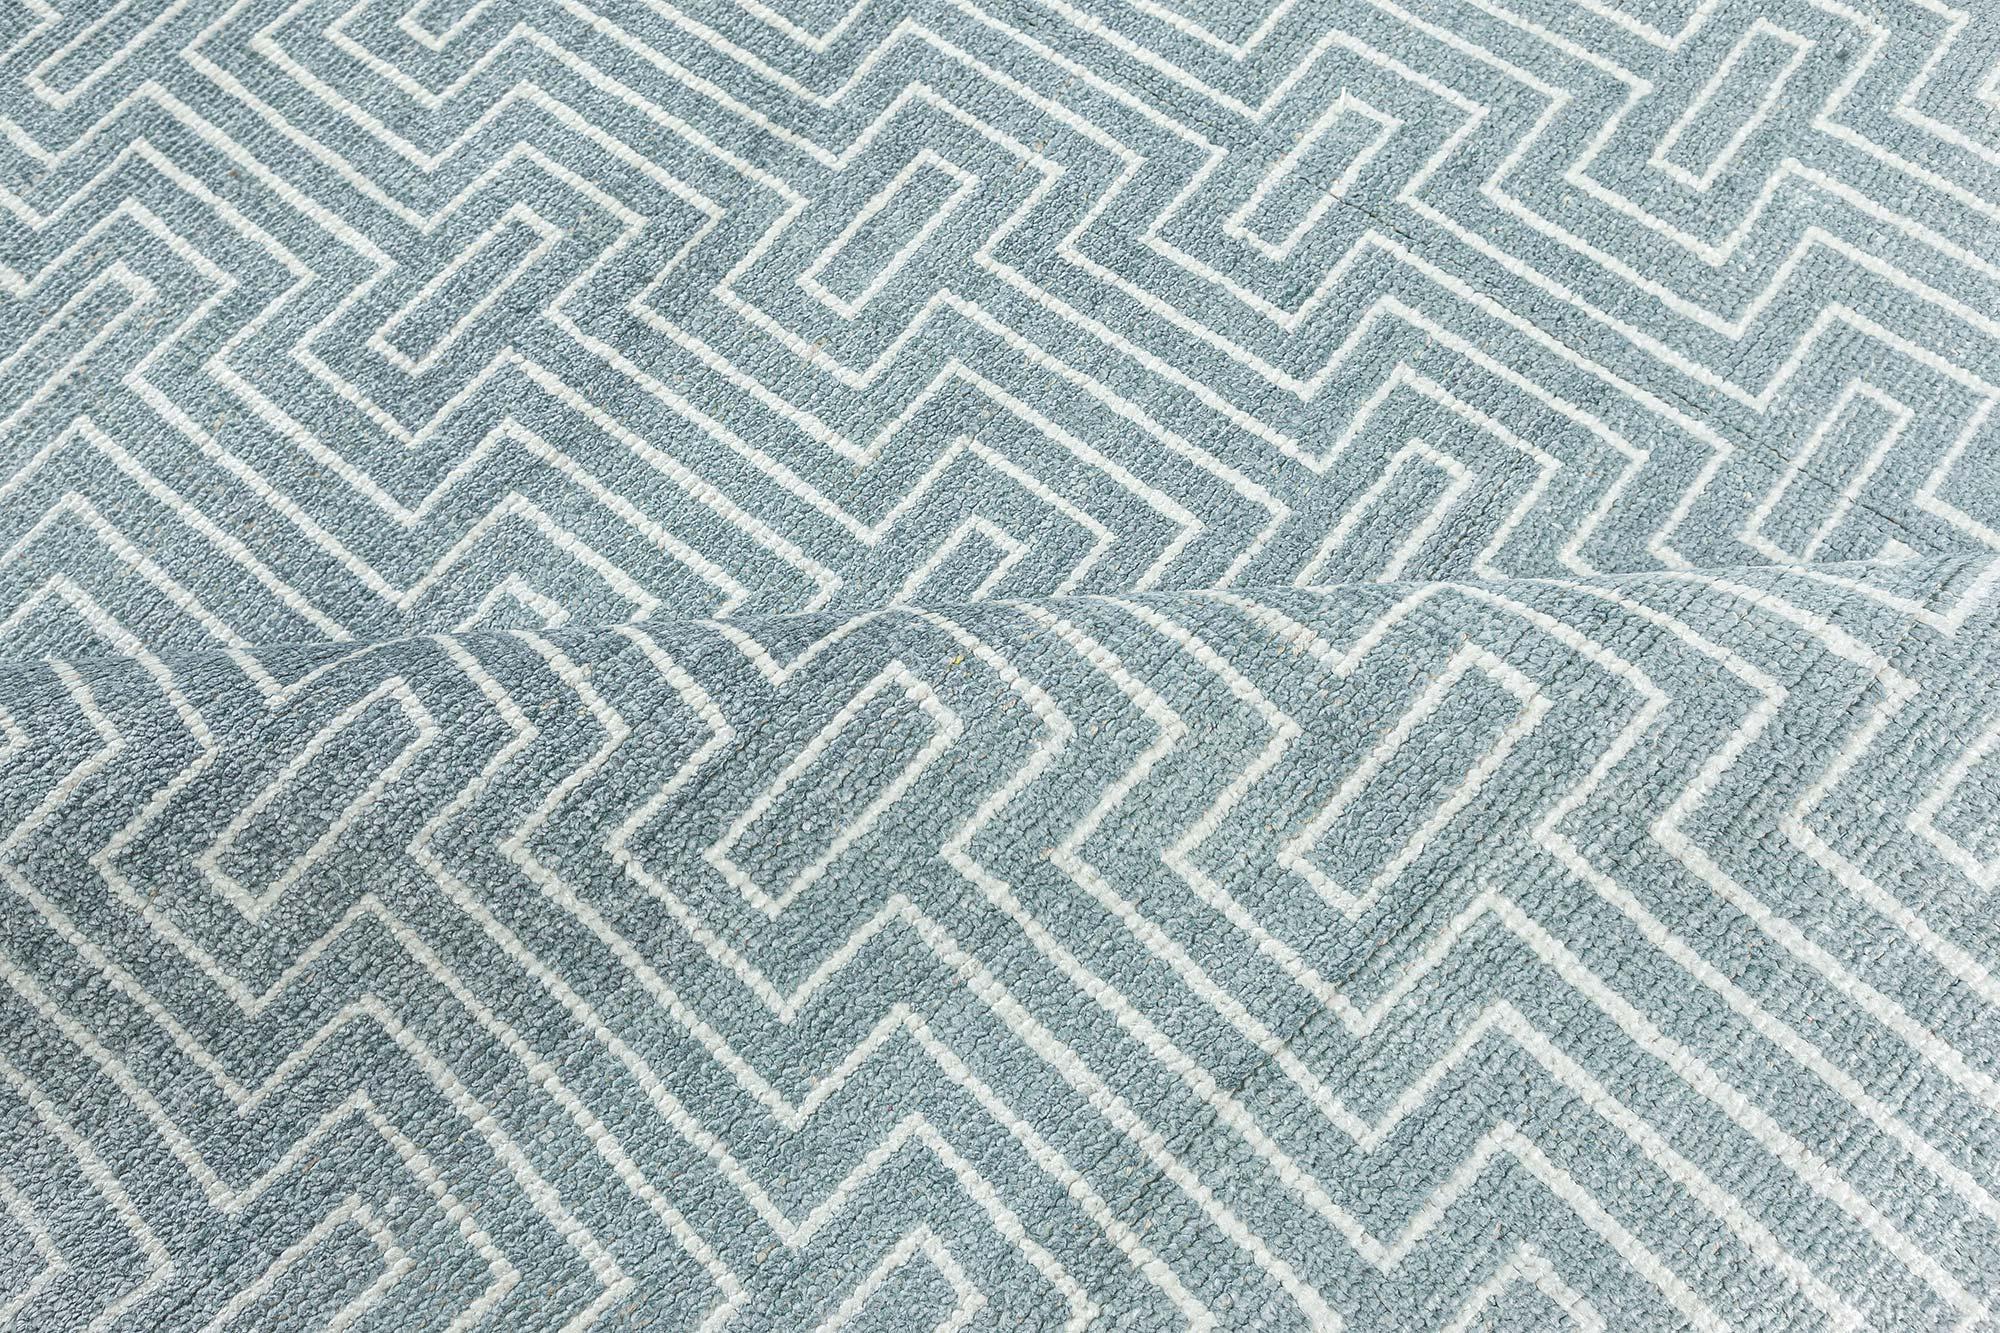 Contemporary Geometric Blue White Bamboo Silk Rug by Doris Leslie Blau
Color: Blue, White
Construction: Knotted
Material: Bamboo Silk